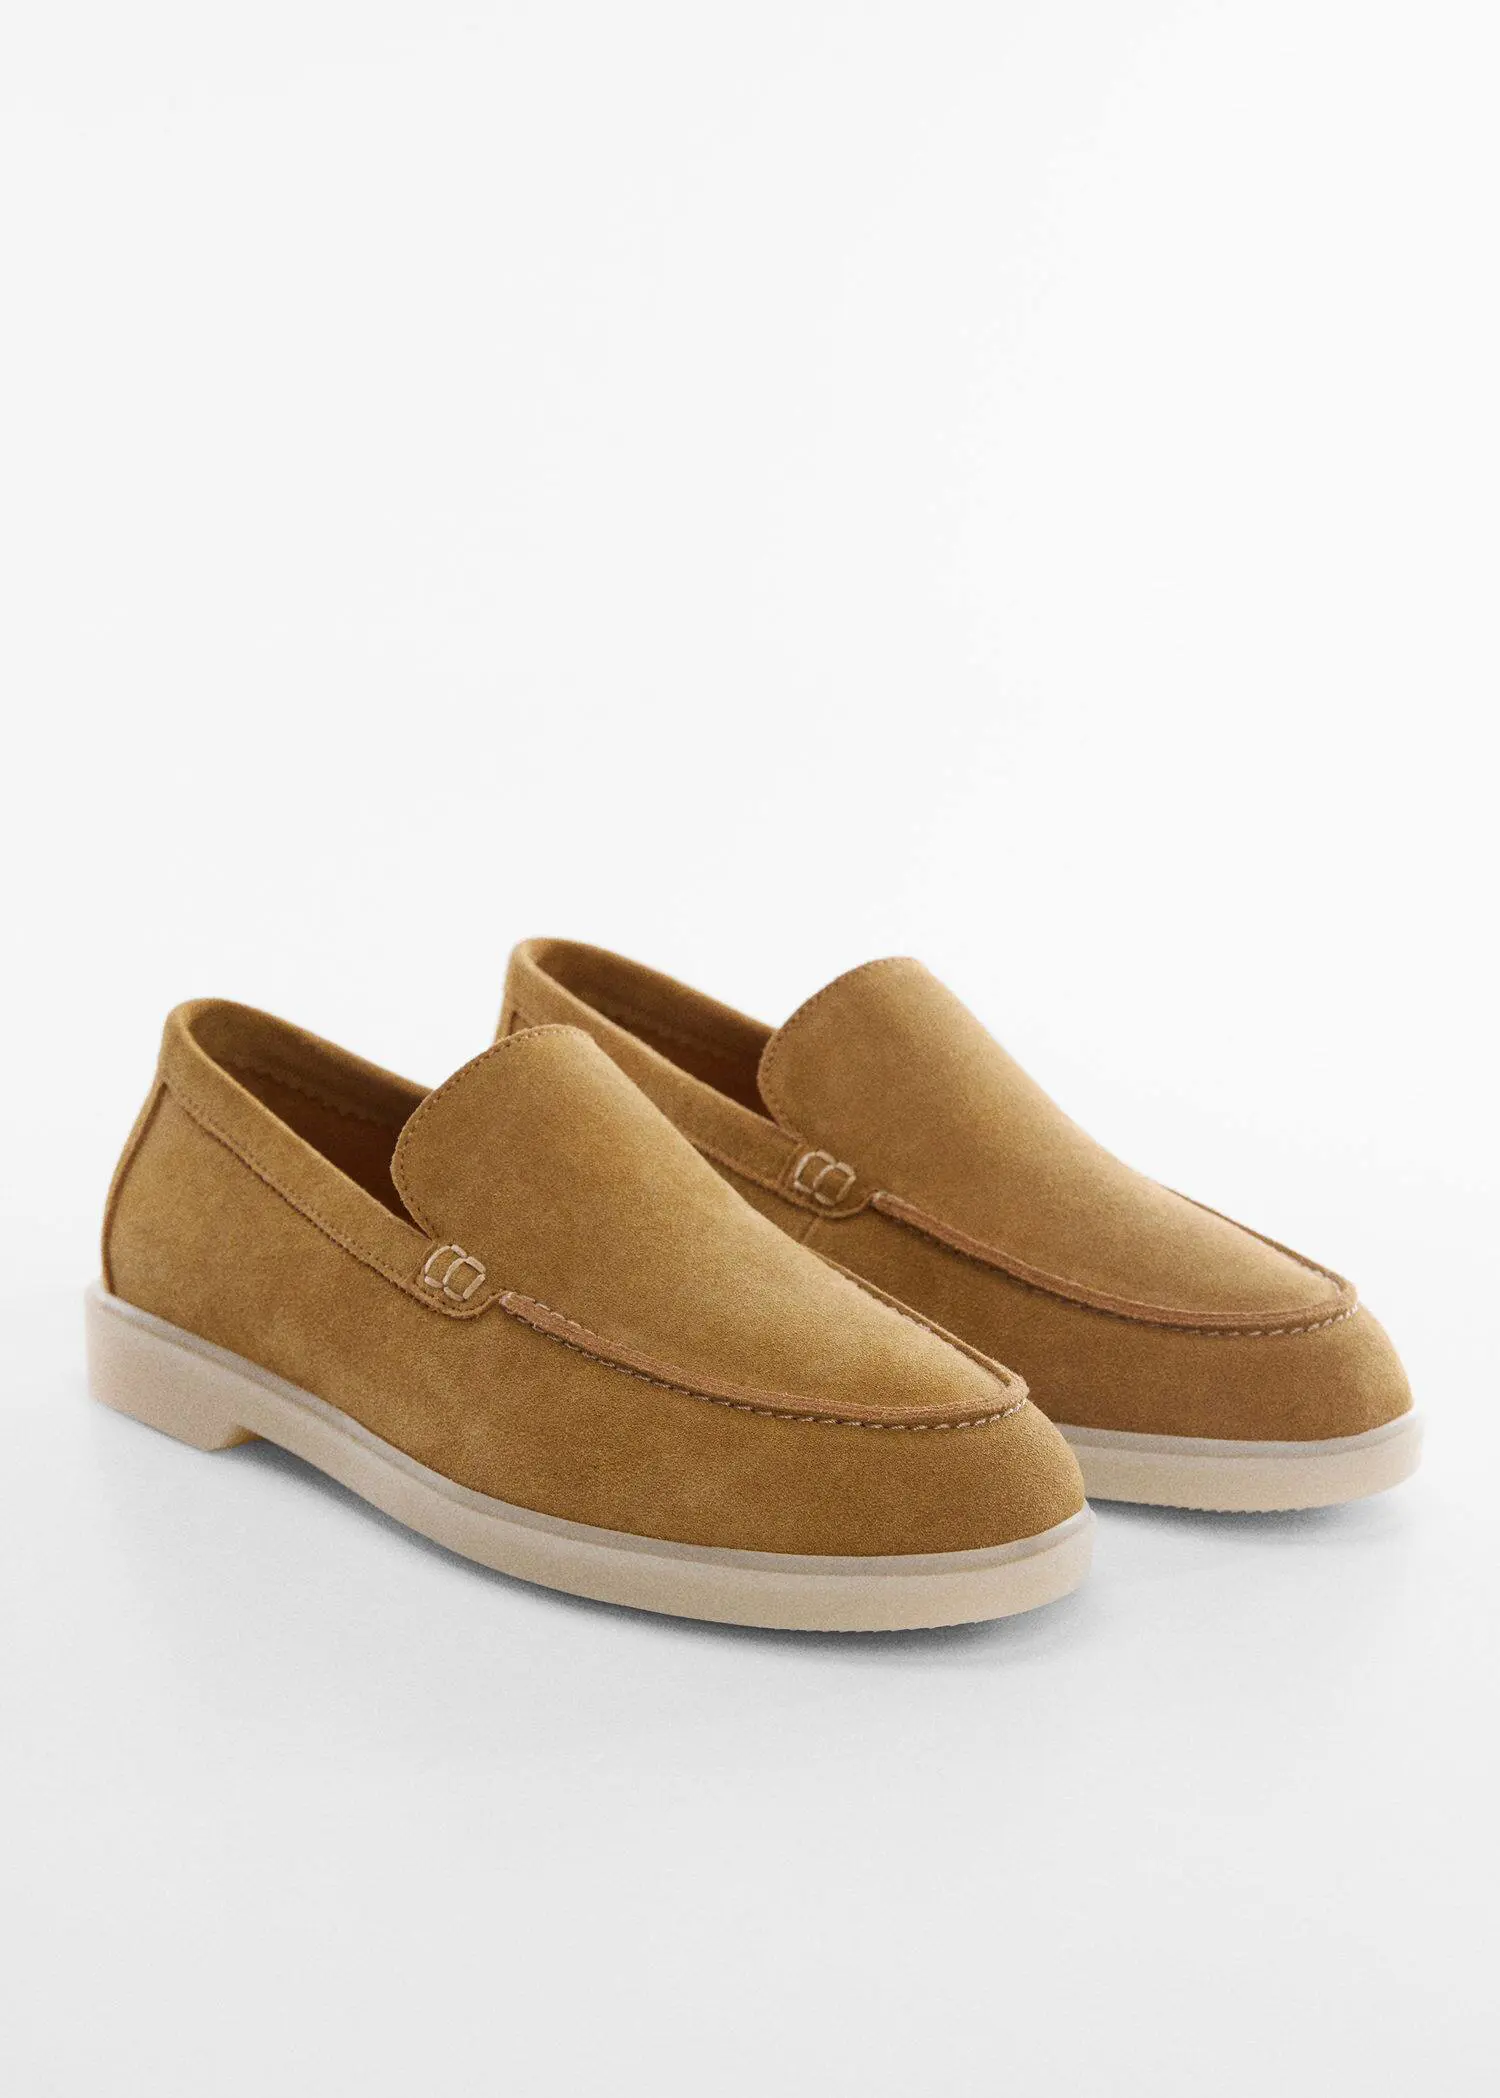 Mango Split leather shoes. a pair of tan loafers on top of a white surface. 